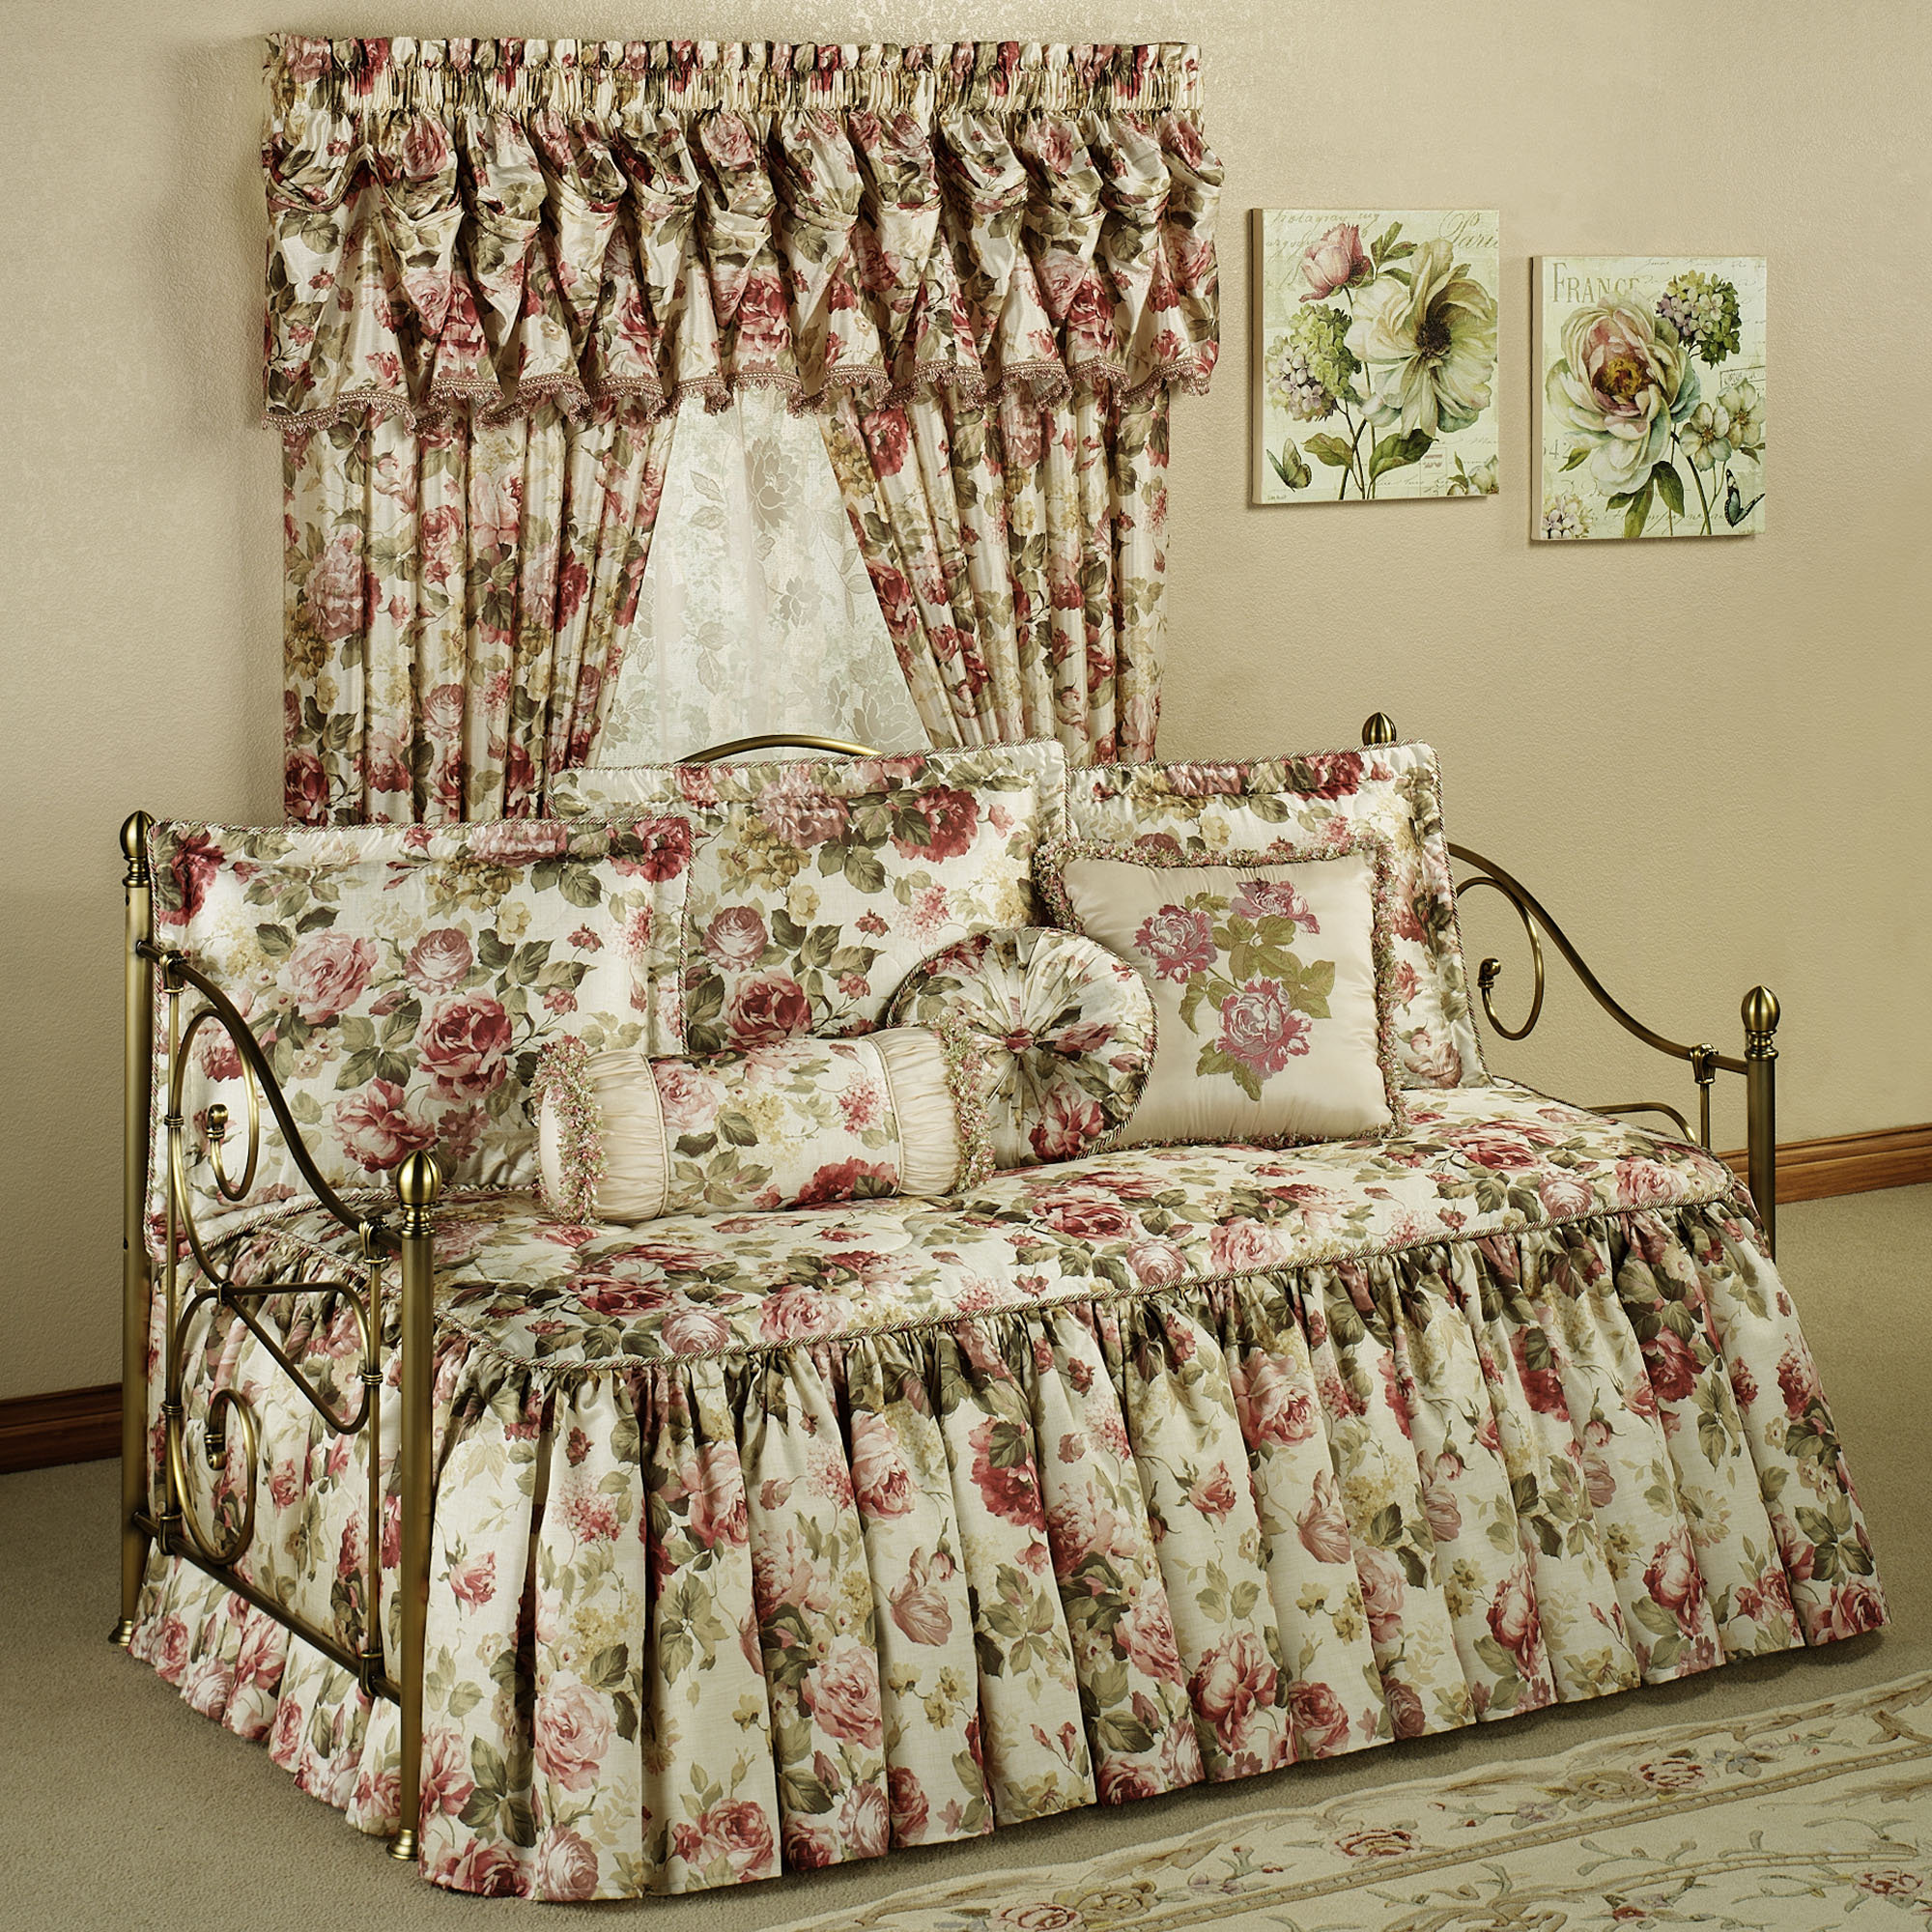 daybed bedding sets clearance photo - 6